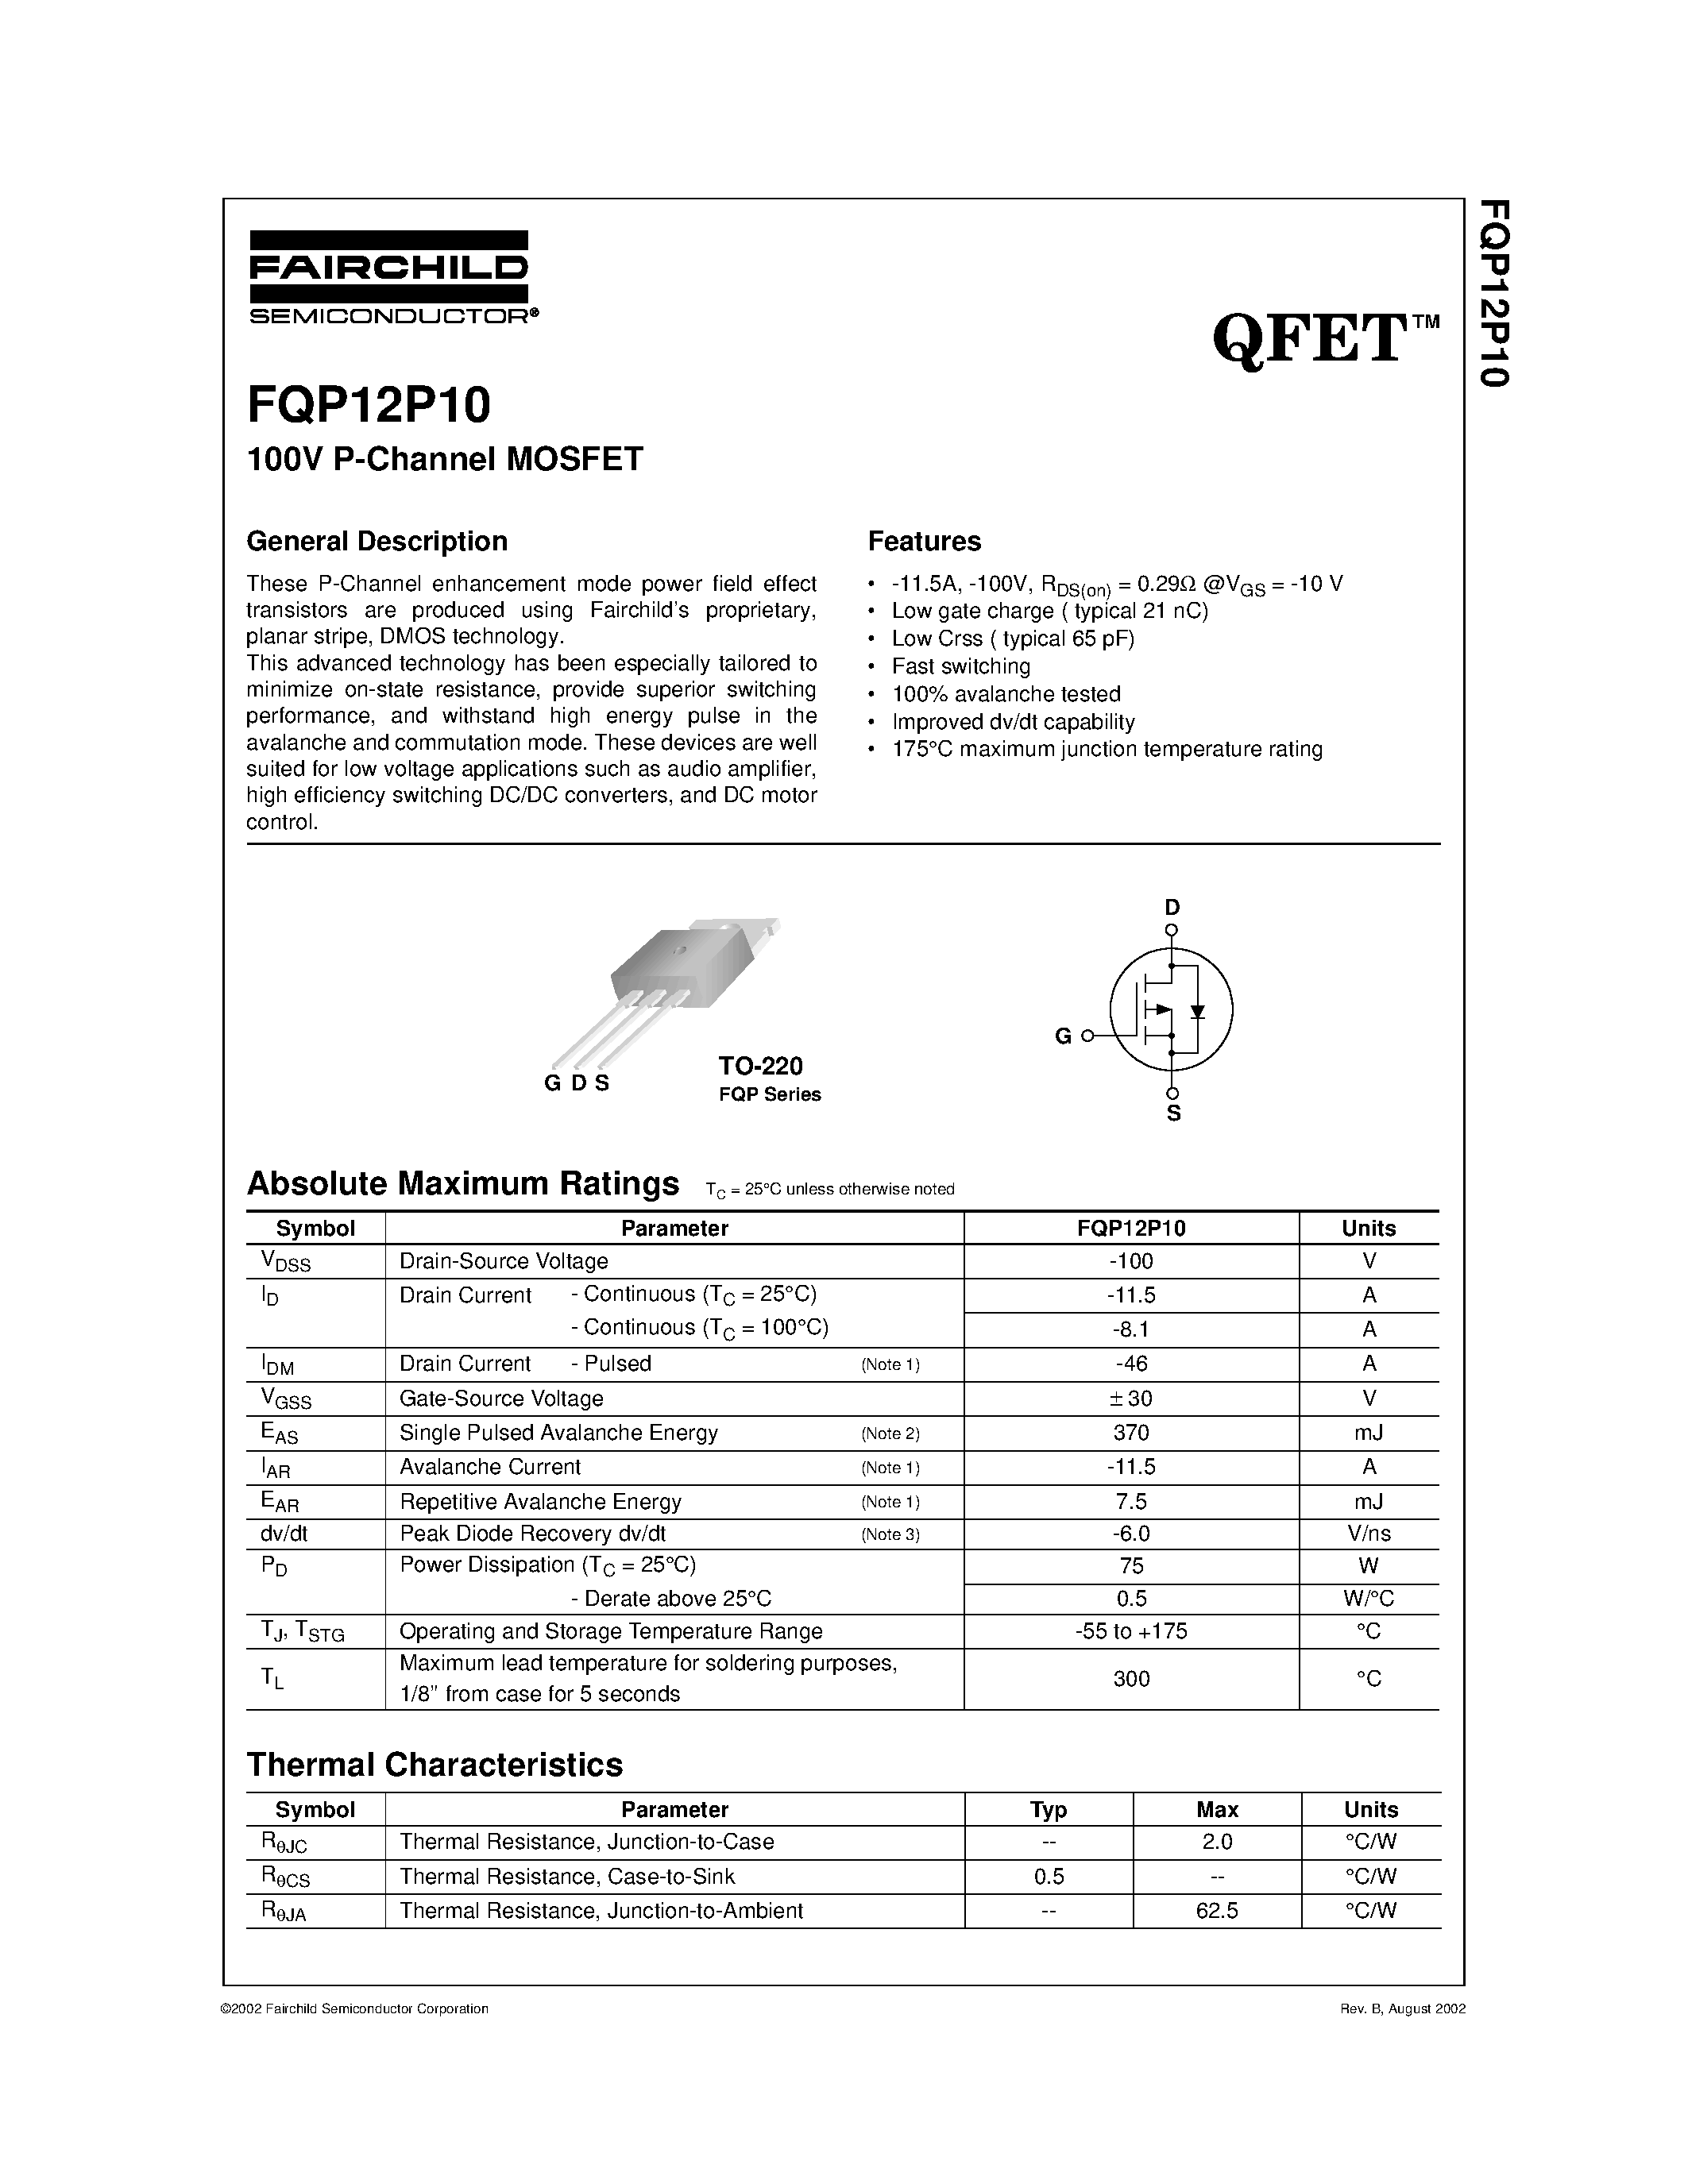 Datasheet FQP12P10 - 100V P-Channel MOSFET page 1